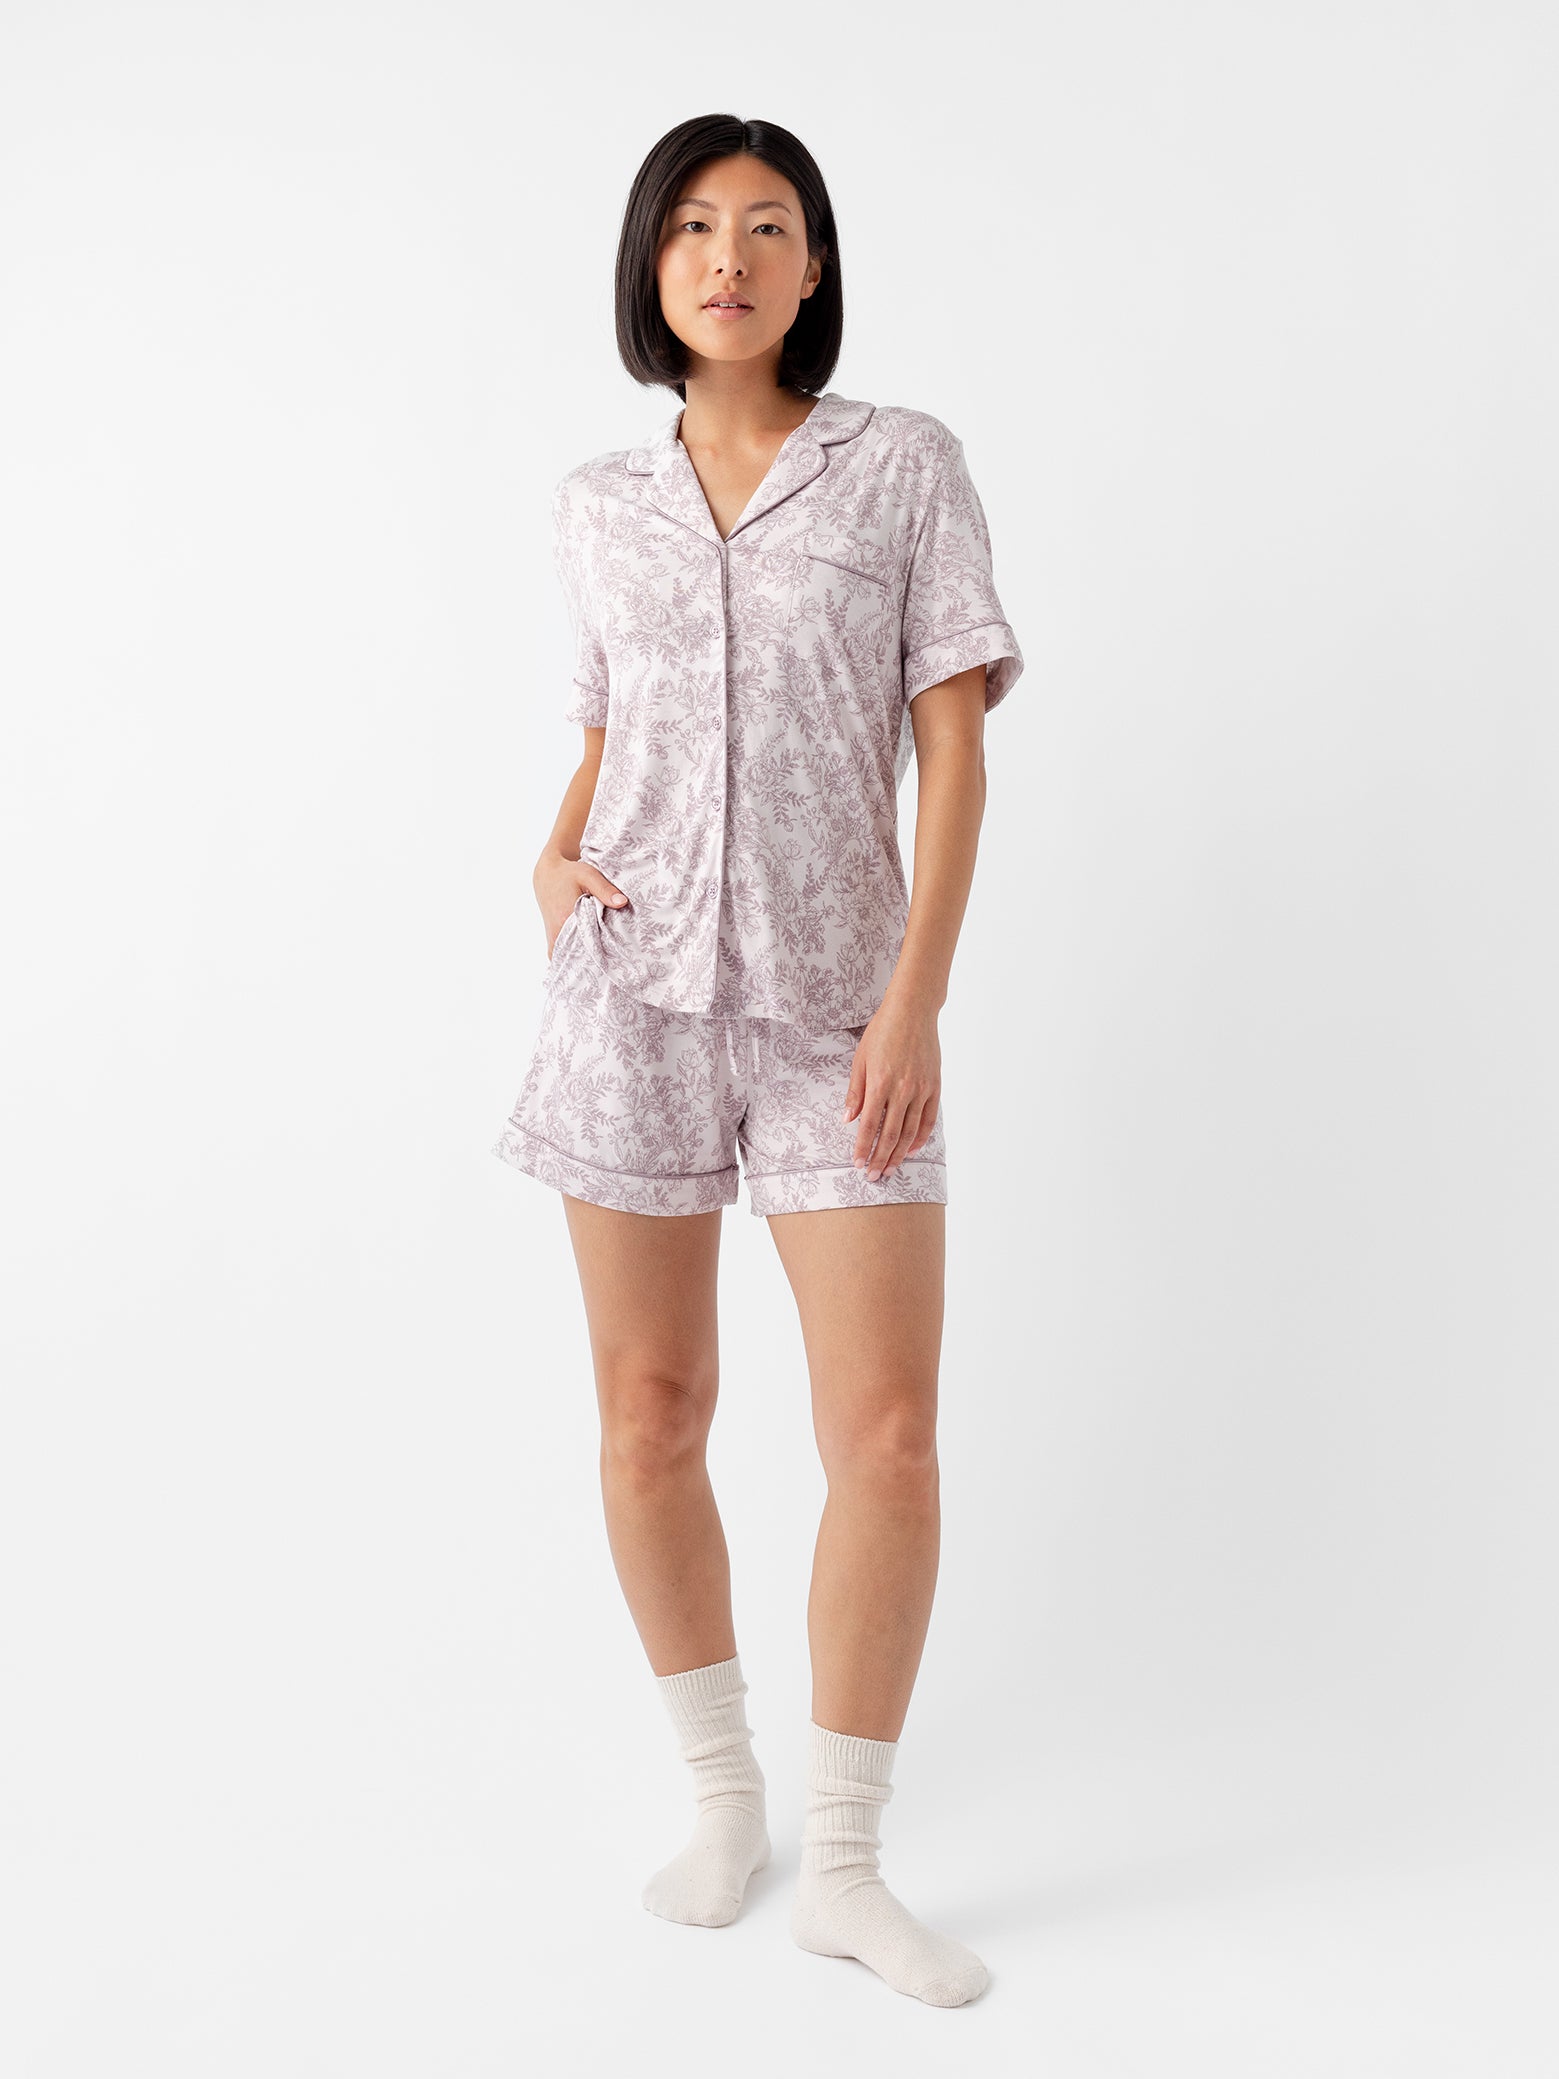 Woman in lilac toile short sleeve pajama set with white background 